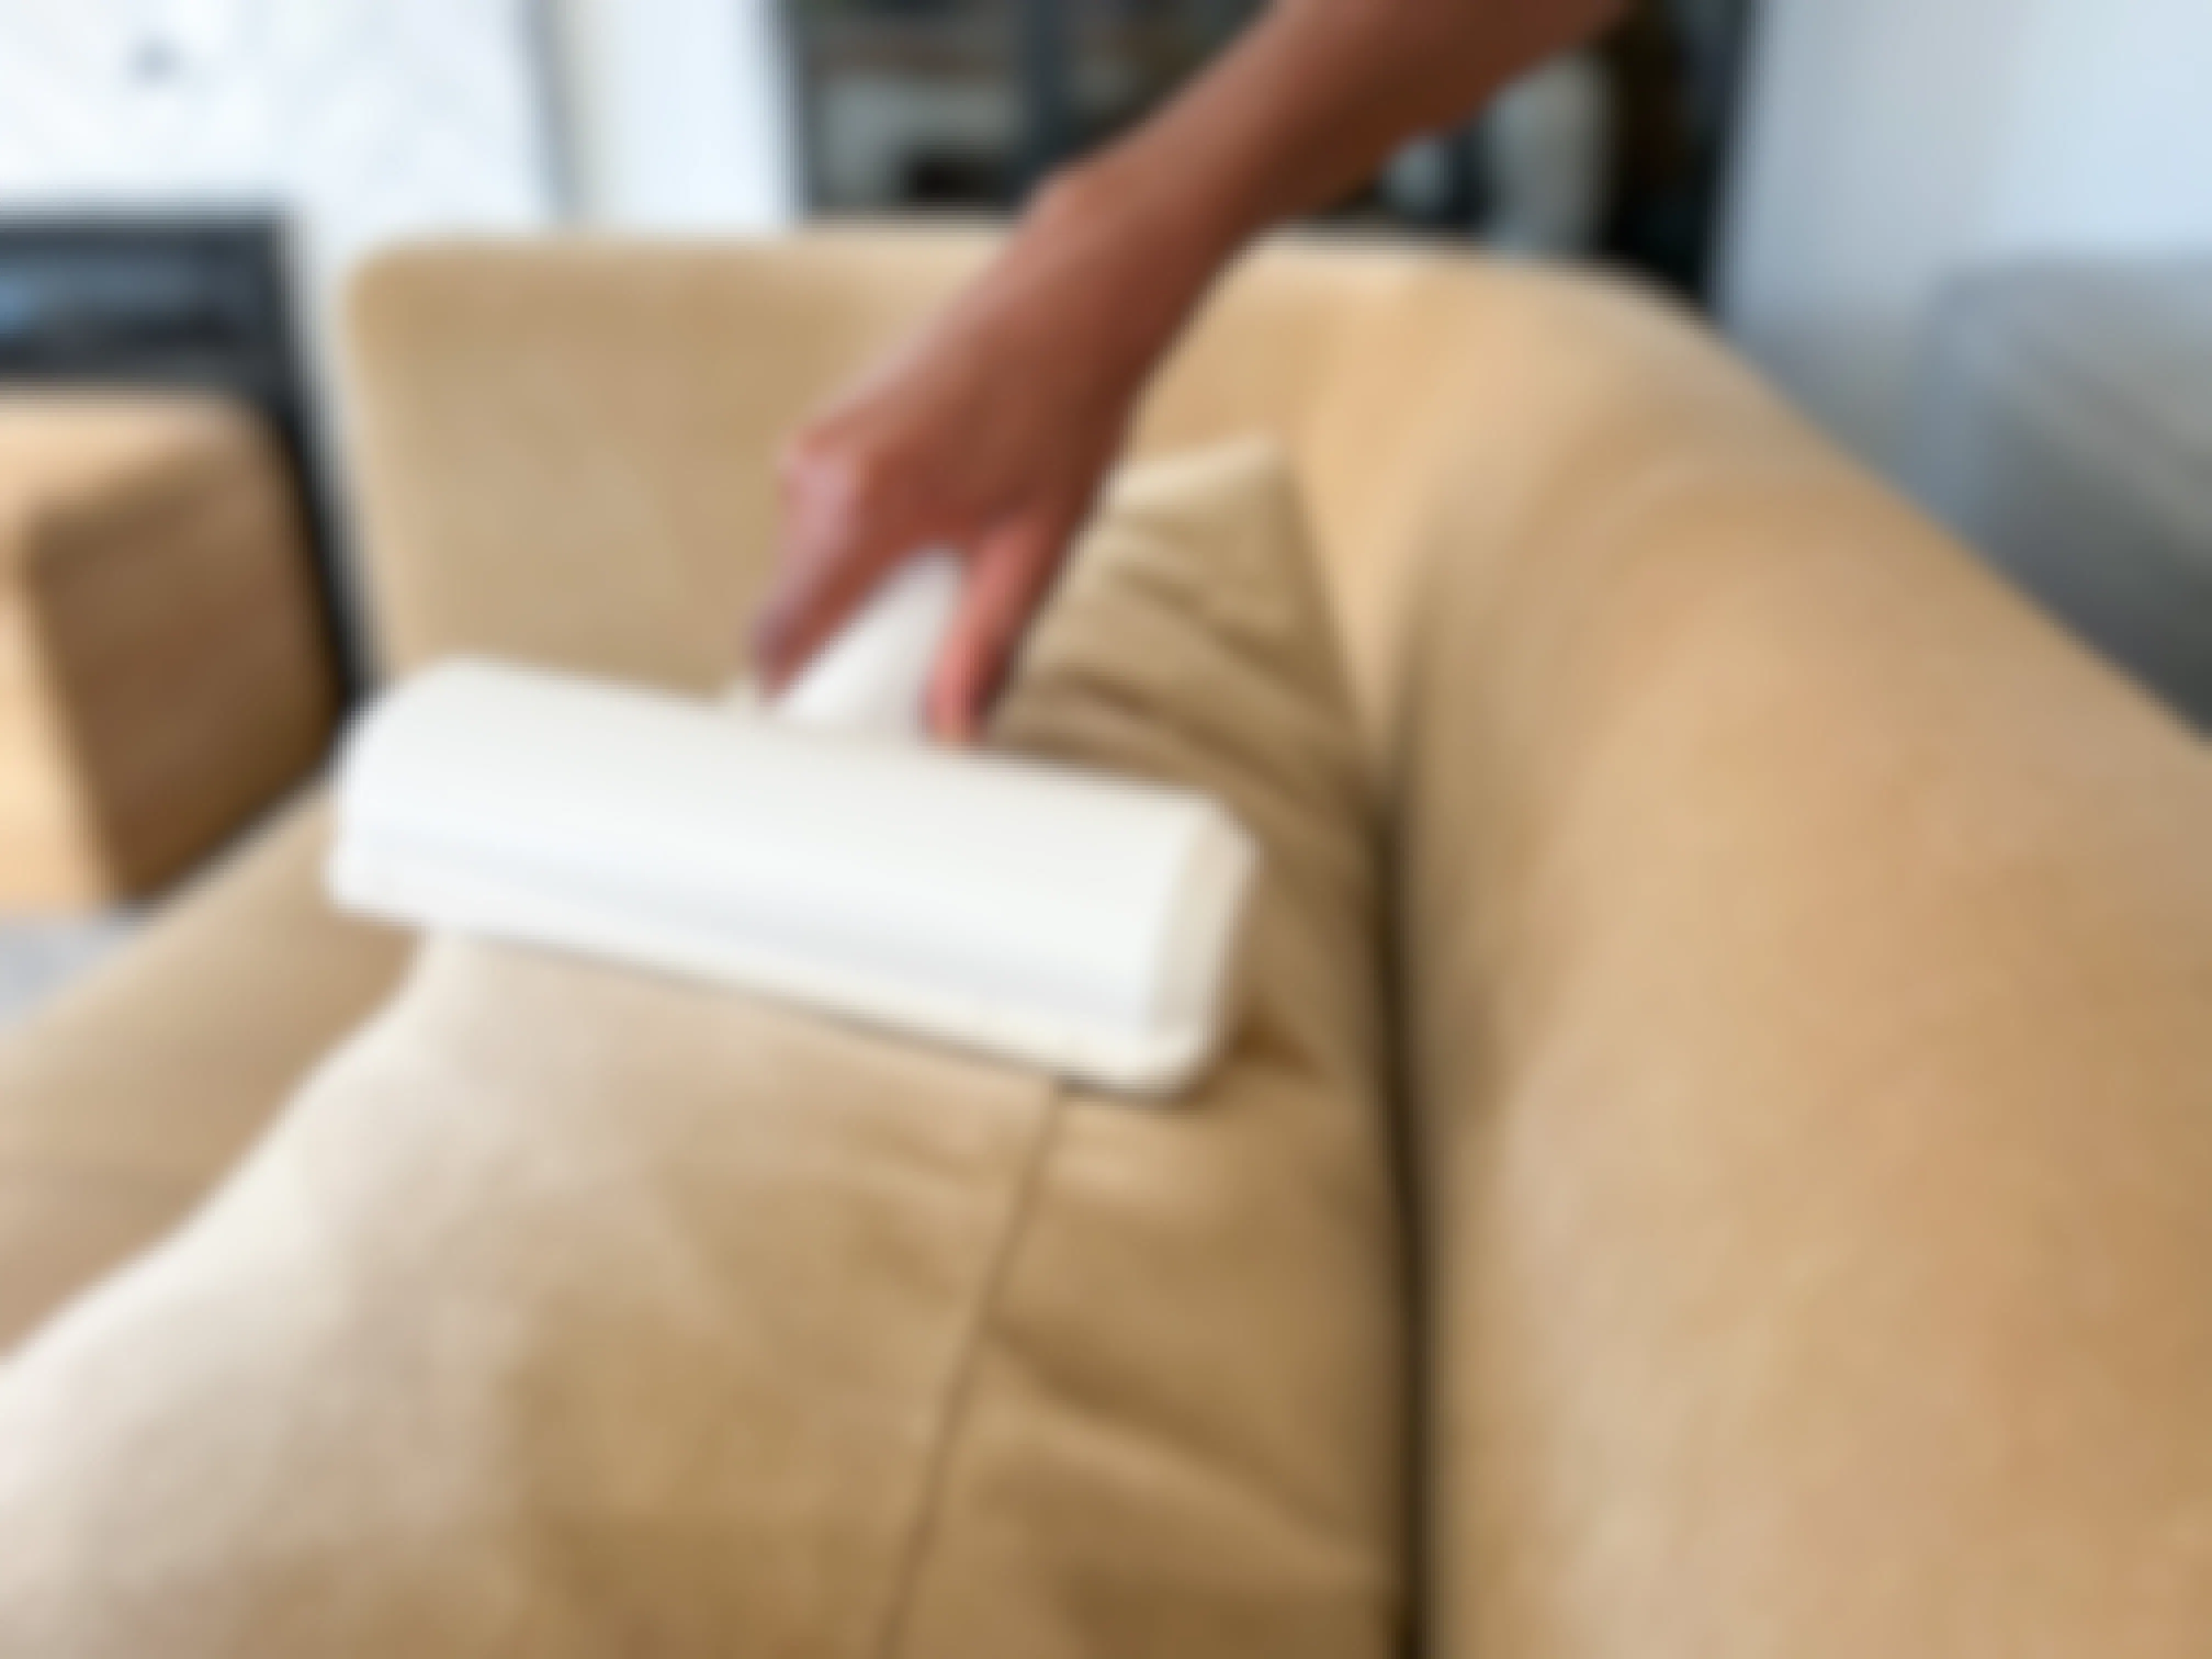 A person using a ChomChom pet hair remover on a couch.